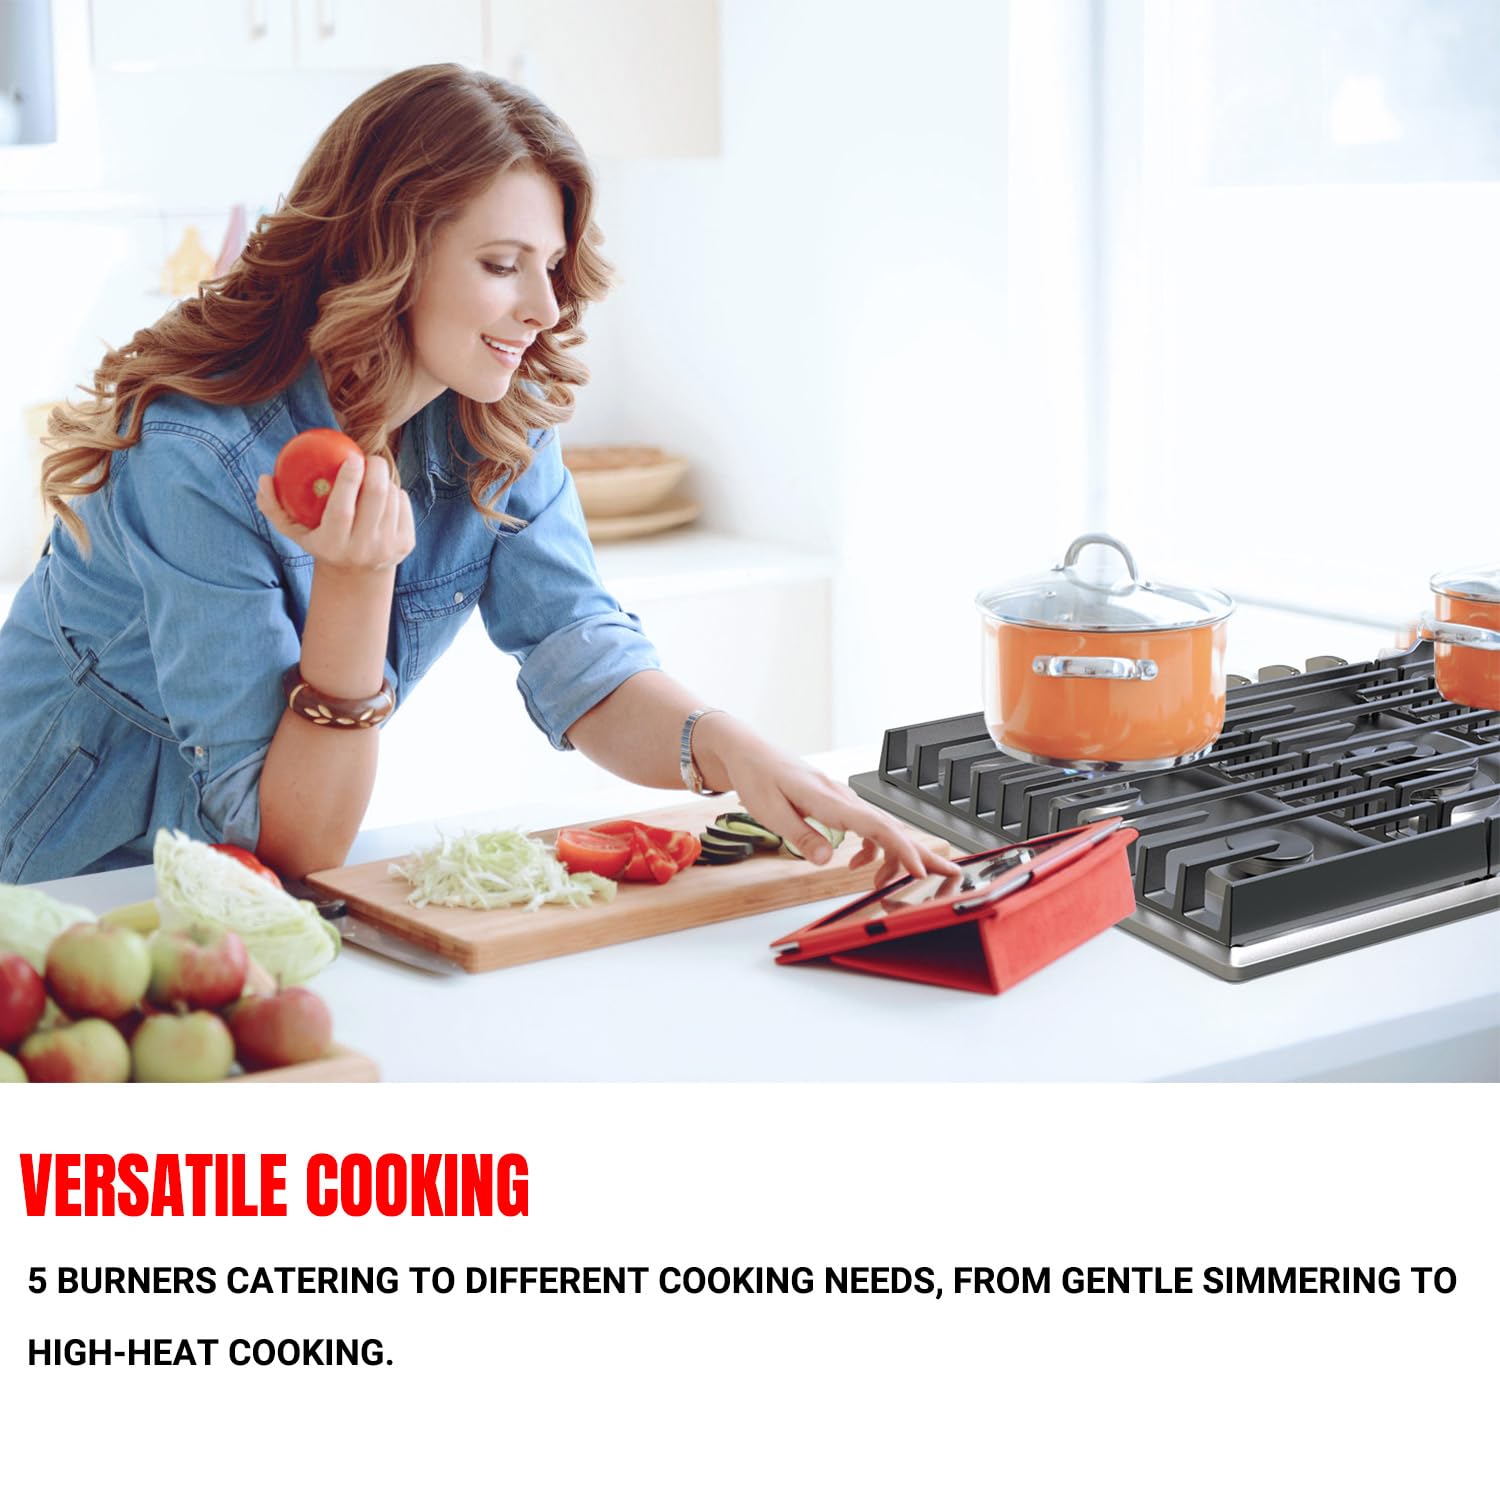 5 BURNERS CATERING TO DIFFERENT COOKING NEEDS, FROM GENTLE SIMMERING TOHIGH-HEAT COOKING.